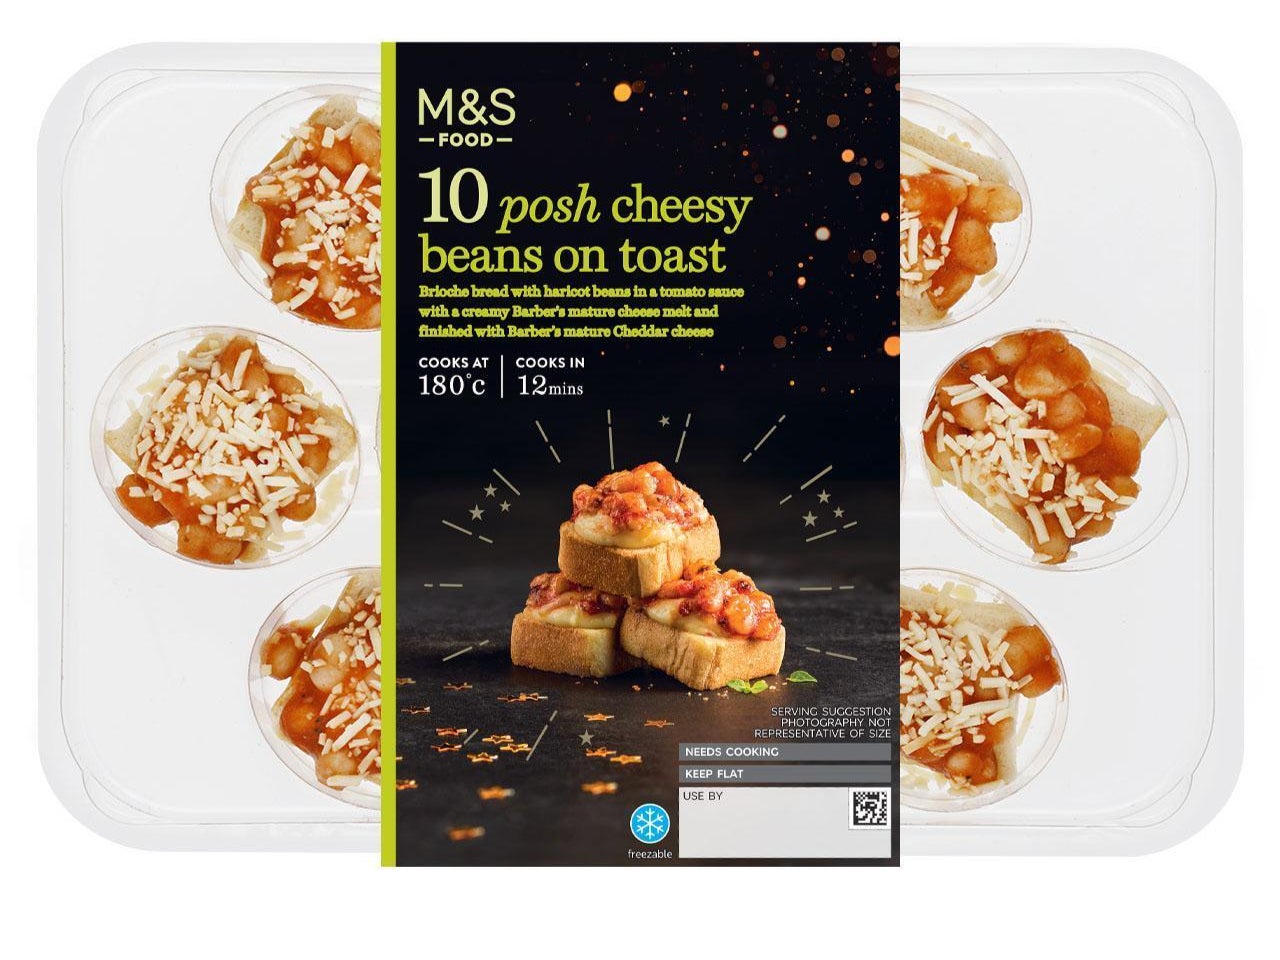 M&S is under fire for selling ‘posh cheesy beans on toast’ for £5